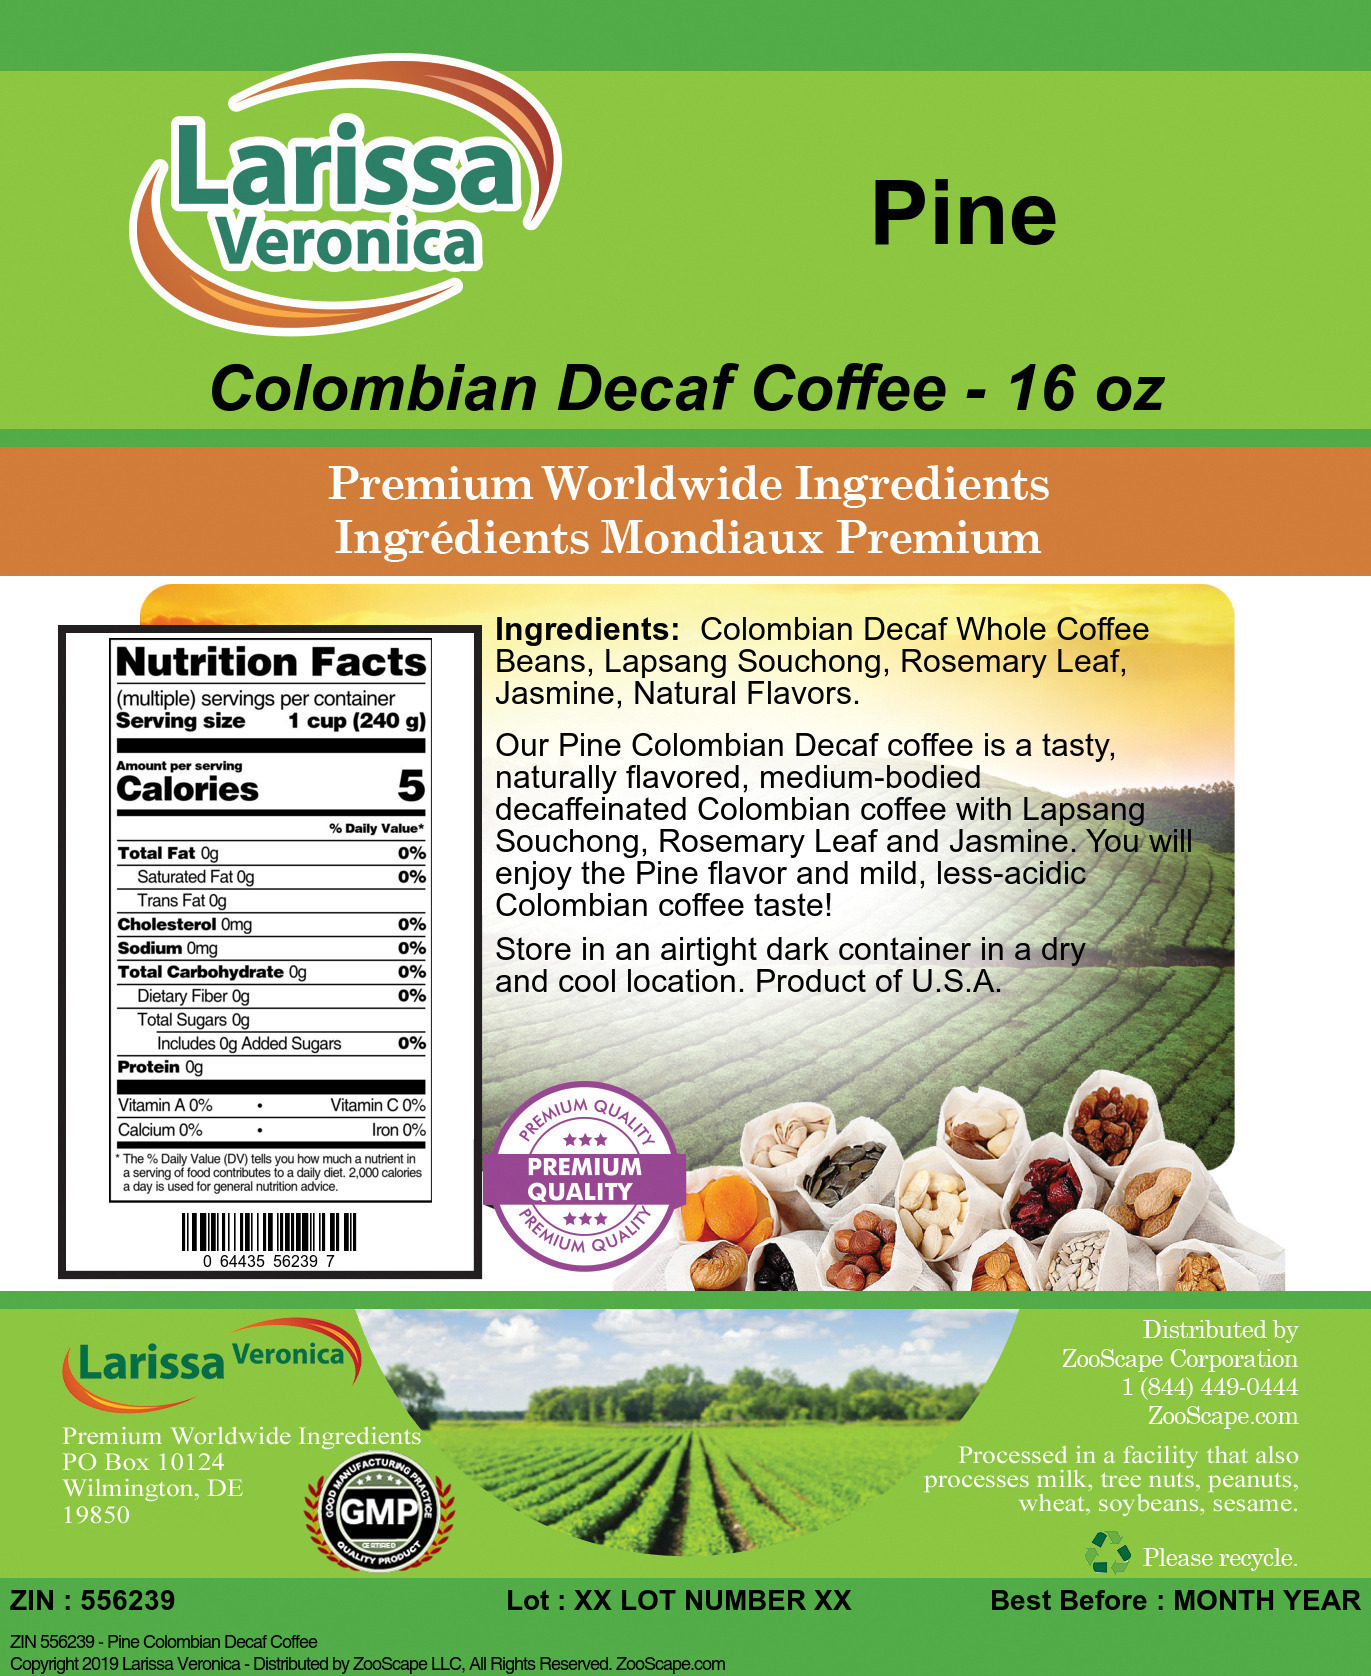 Pine Colombian Decaf Coffee - Label